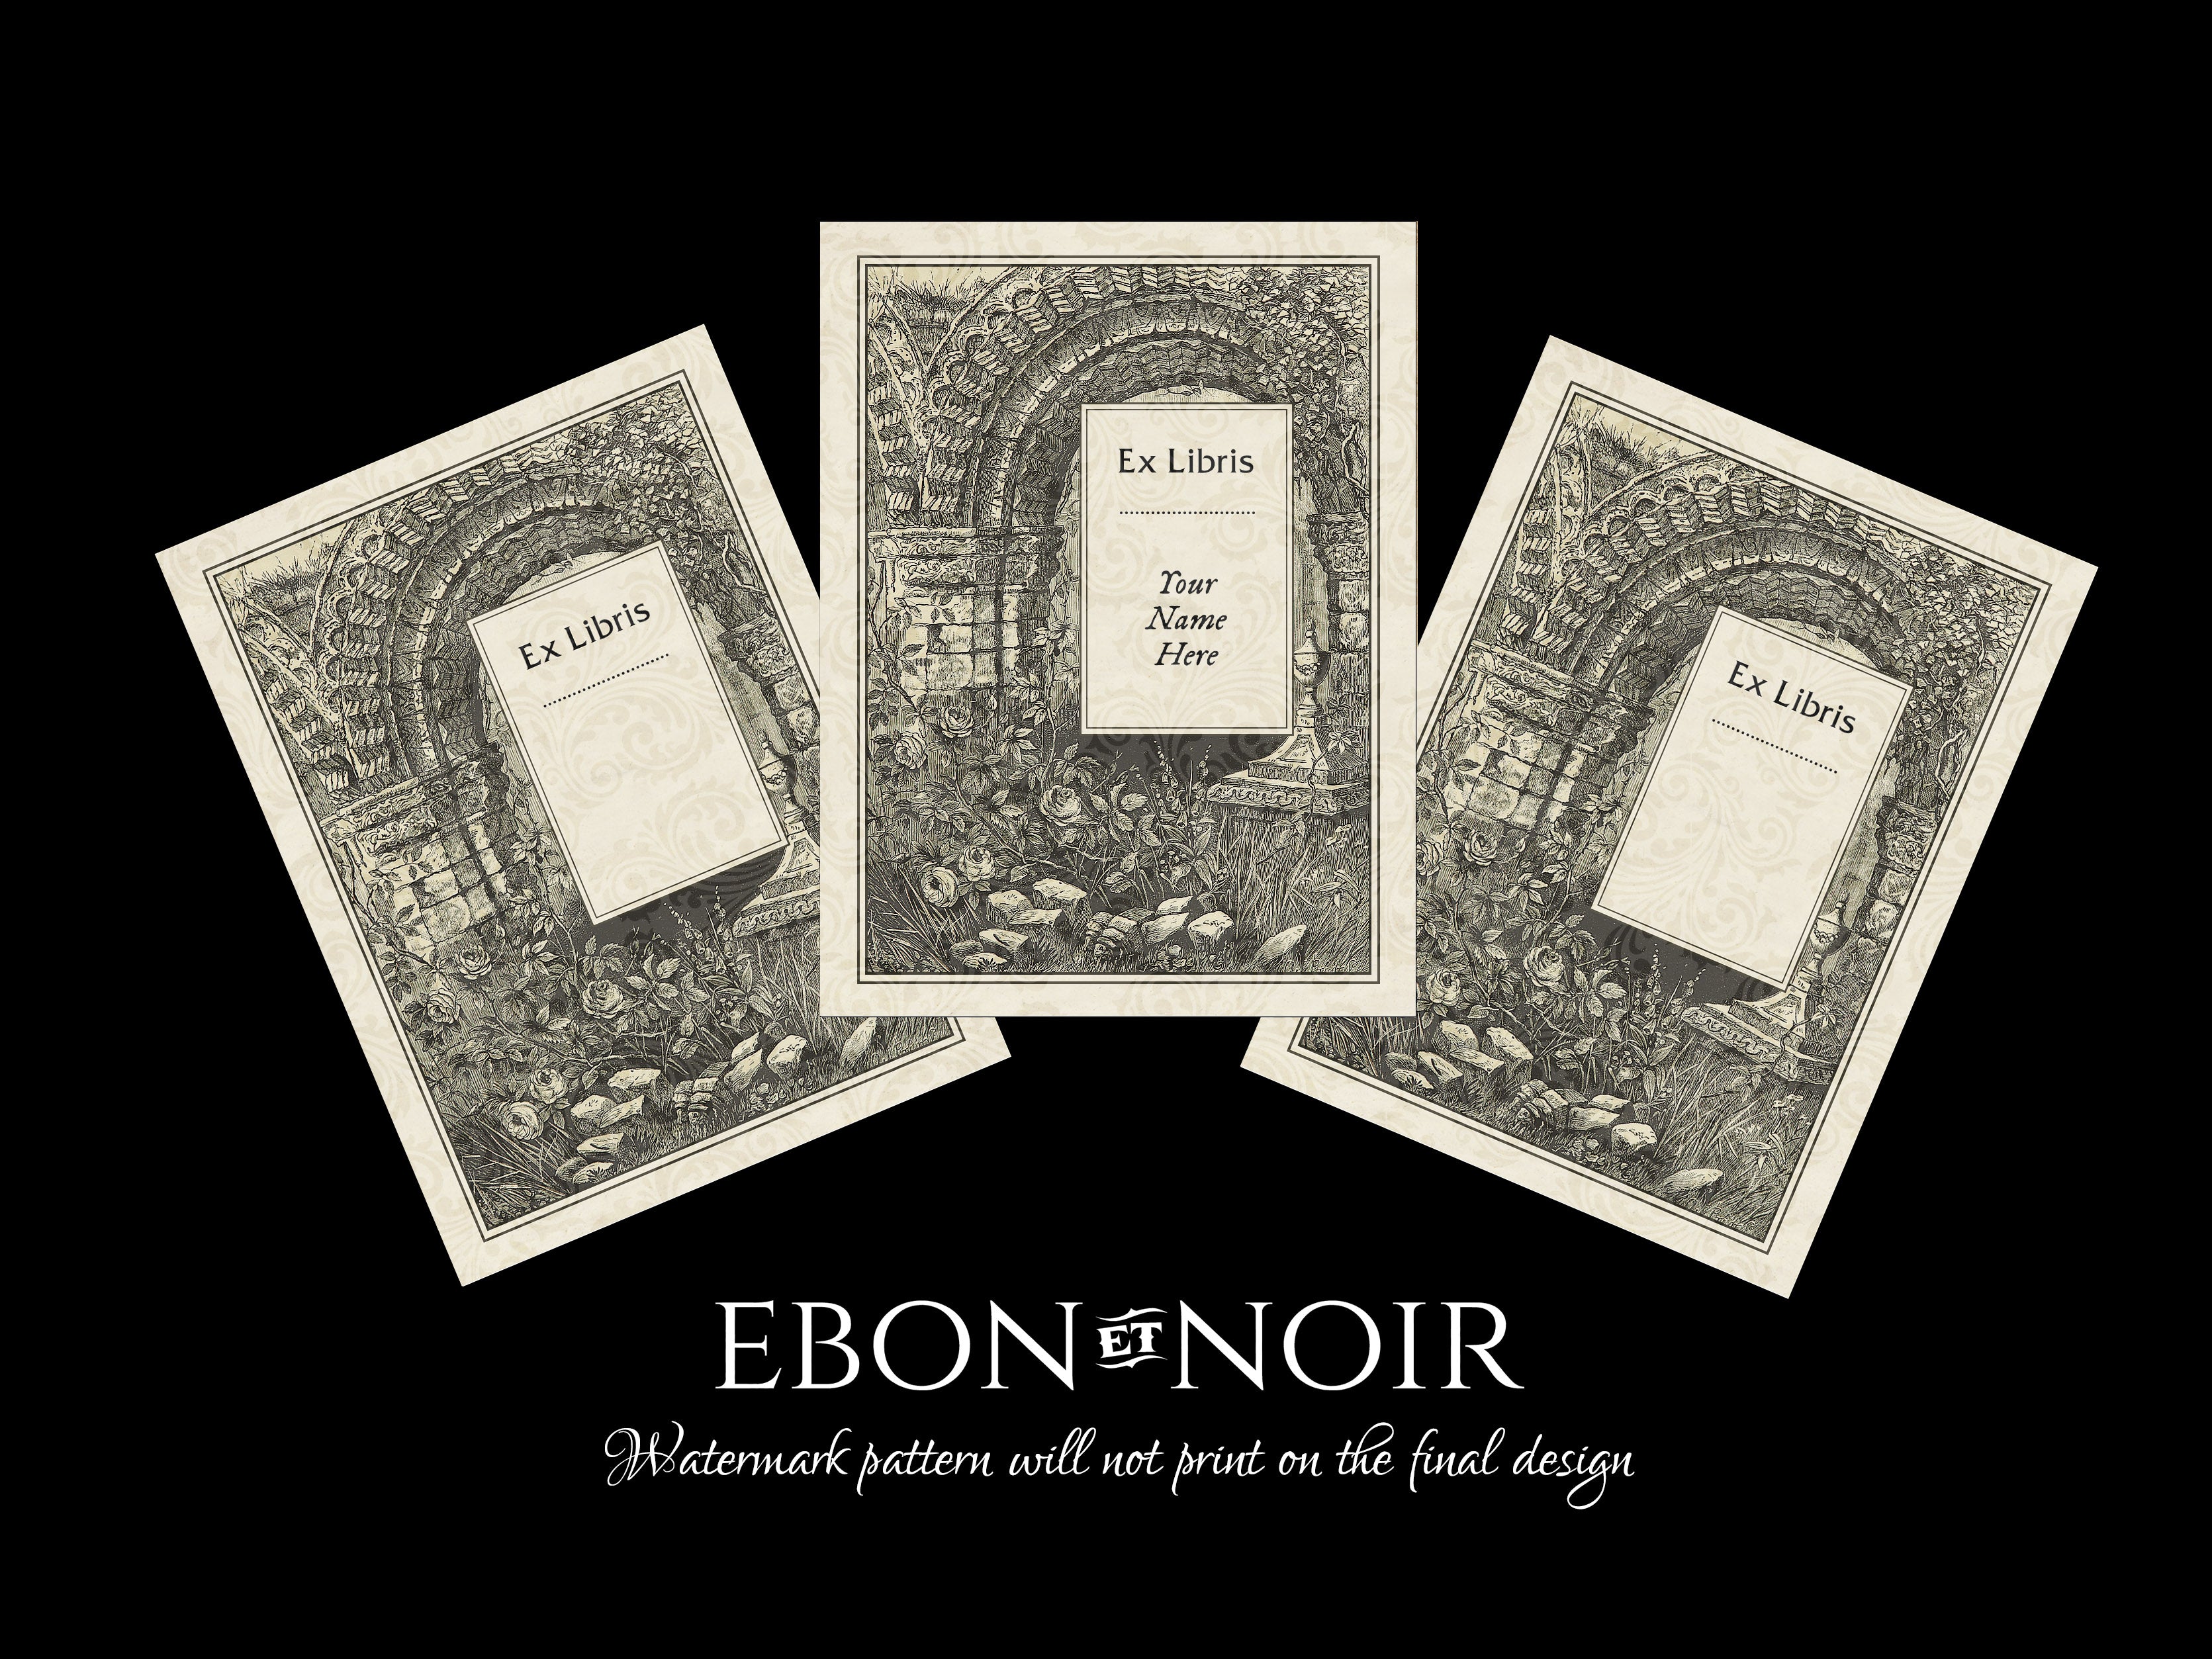 Rose Bower, Personalized Ex-Libris Bookplates, Crafted on Traditional Gummed Paper, 3in x 4in, Set of 30